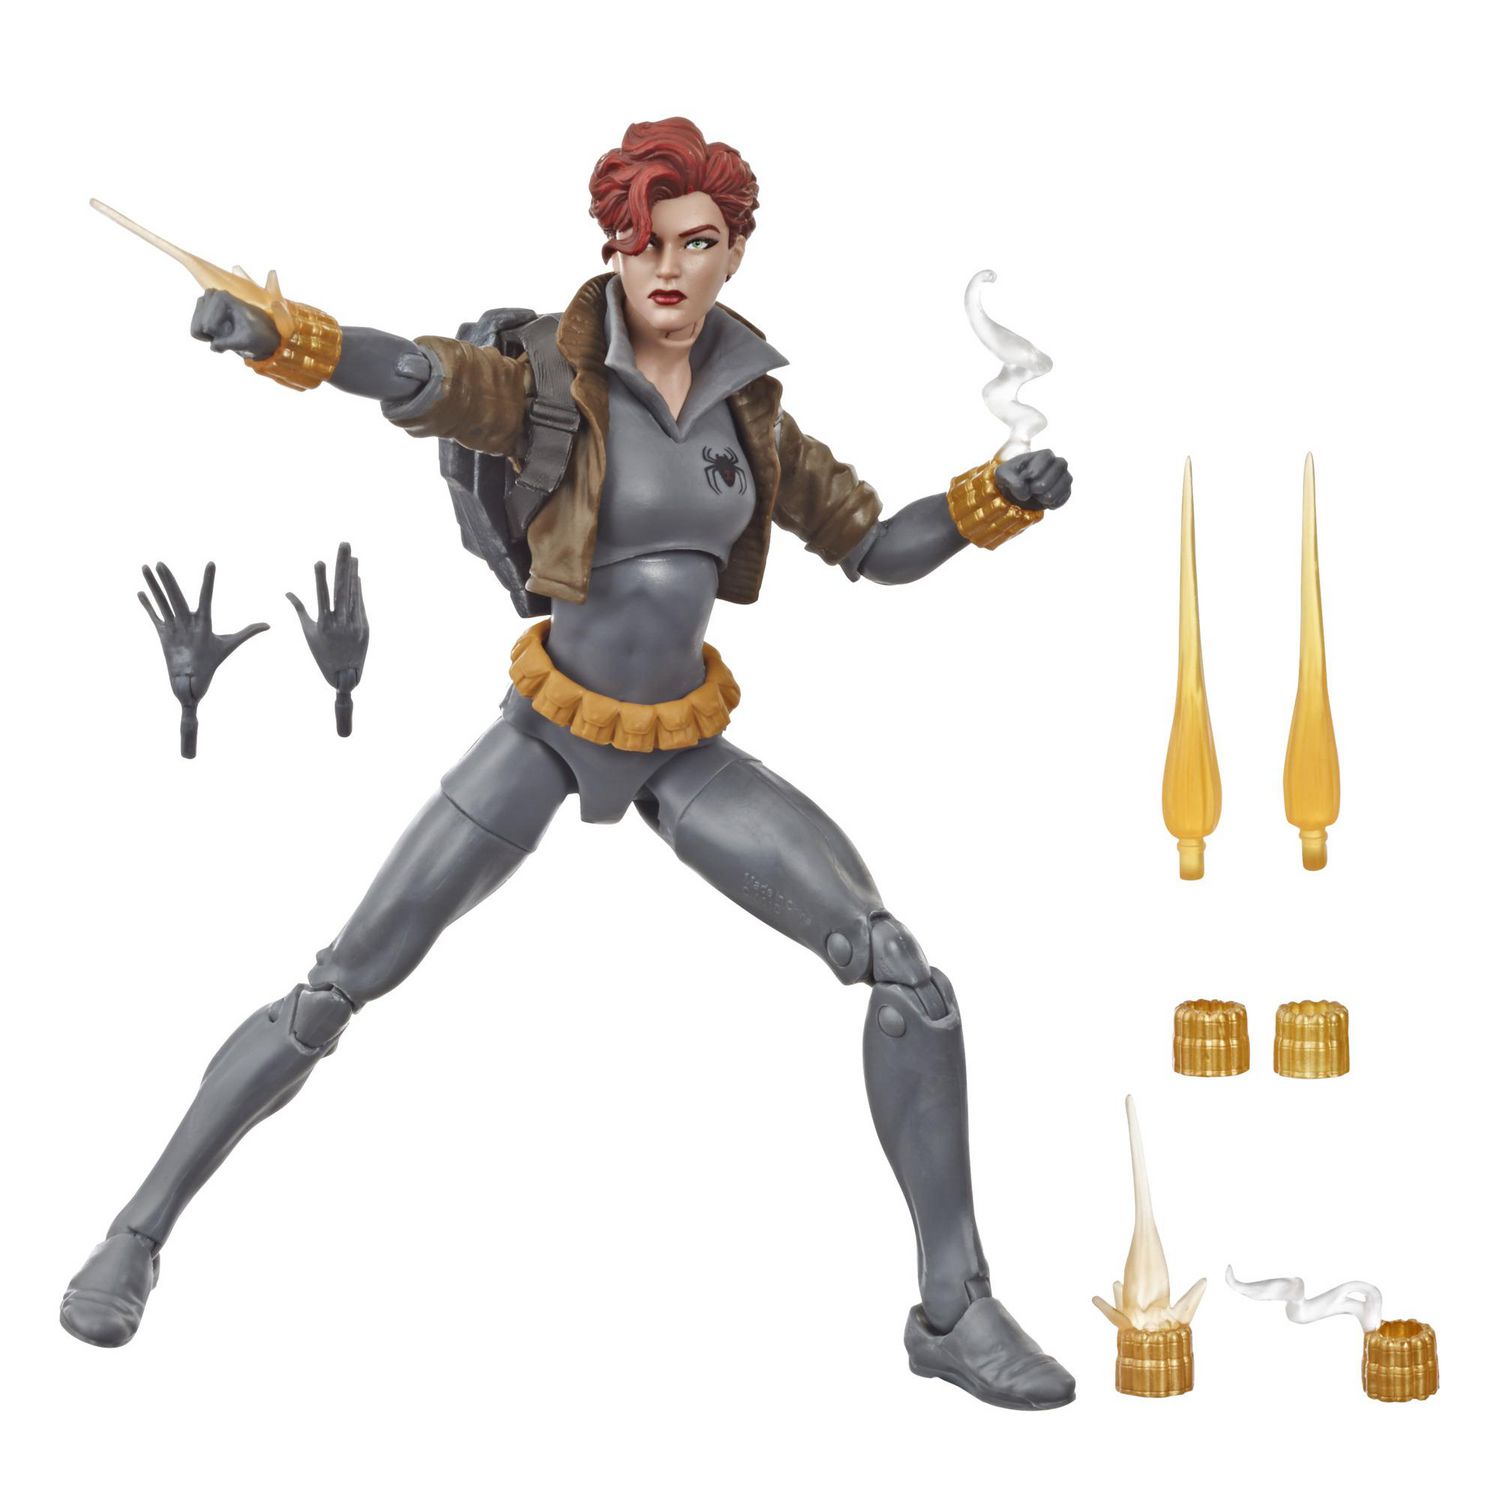 Ages 4 And Up Marvel Hasbro Legends Series Walmart Exclusive 15-cm Collectible Black Widow Action Figure Toy Premium Design Accessories